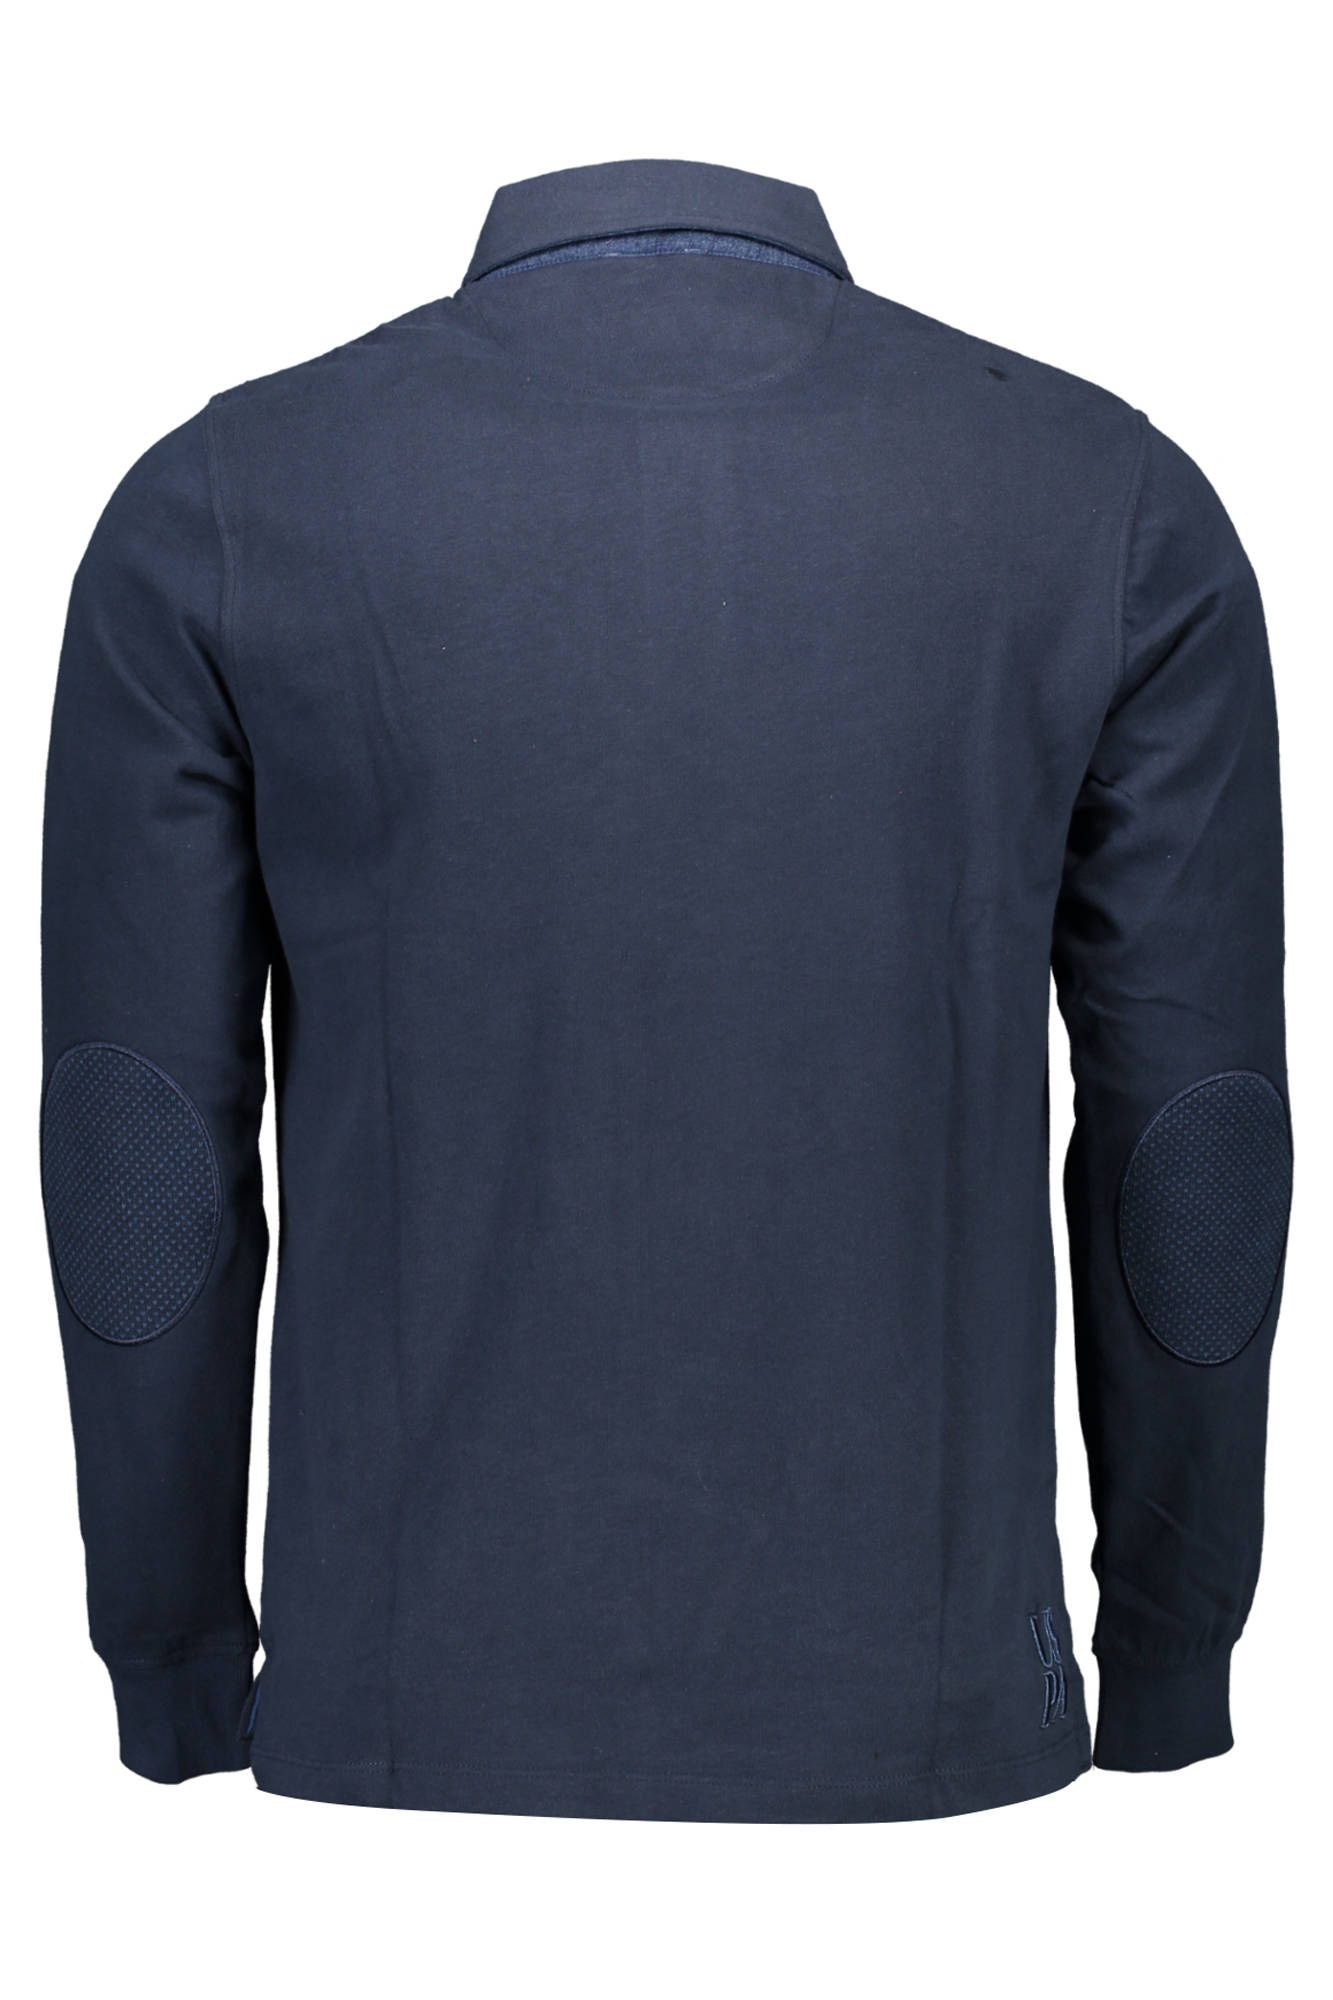 Classic Long Sleeve Polo with Elbow Patches